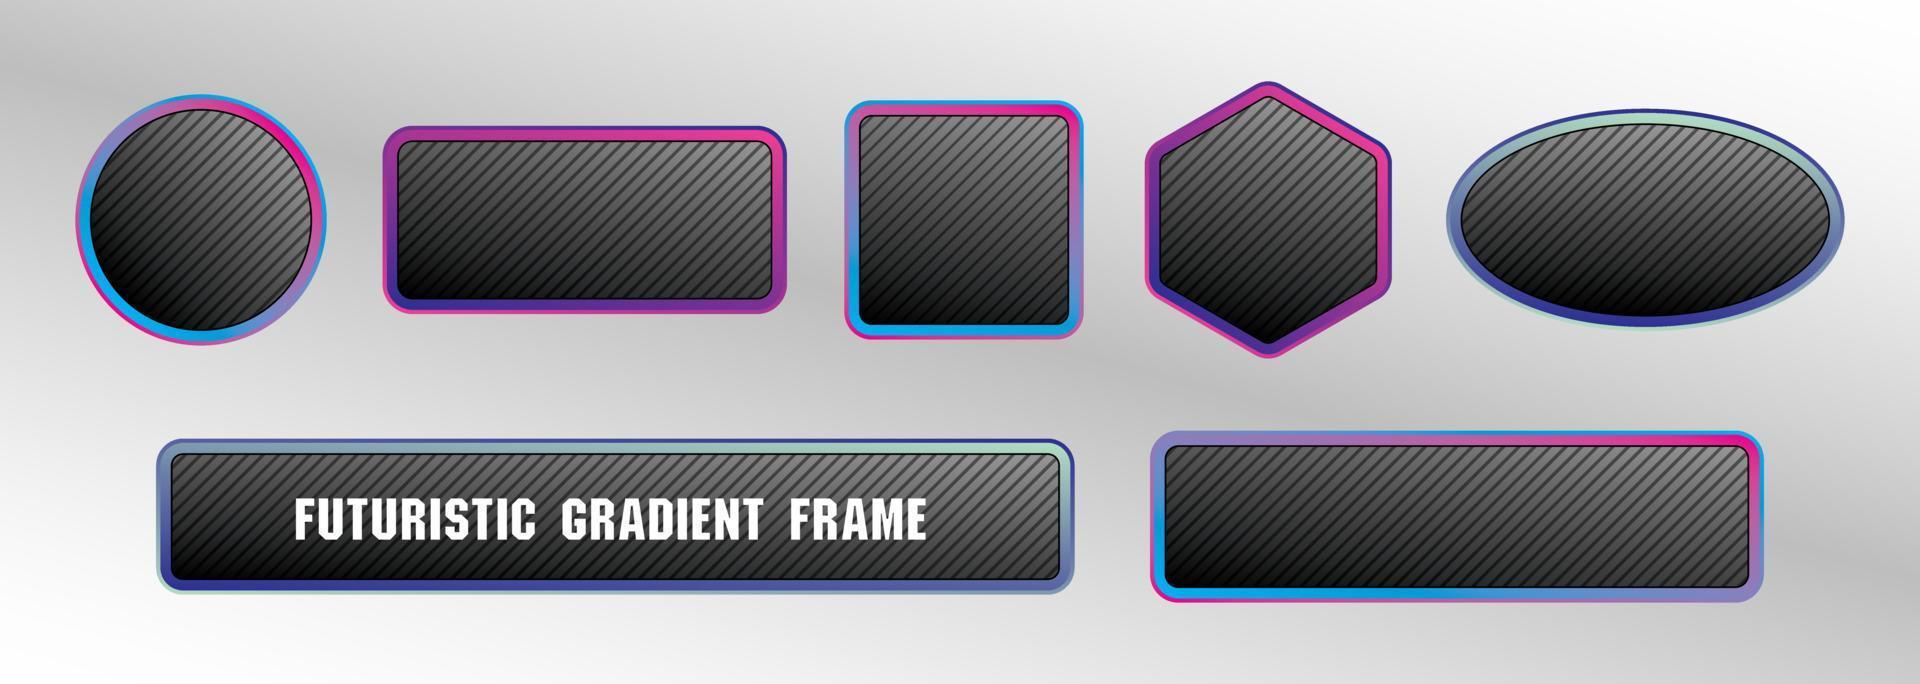 cool futuristic style gradient color frame with black signboard graphic vector set for adding text